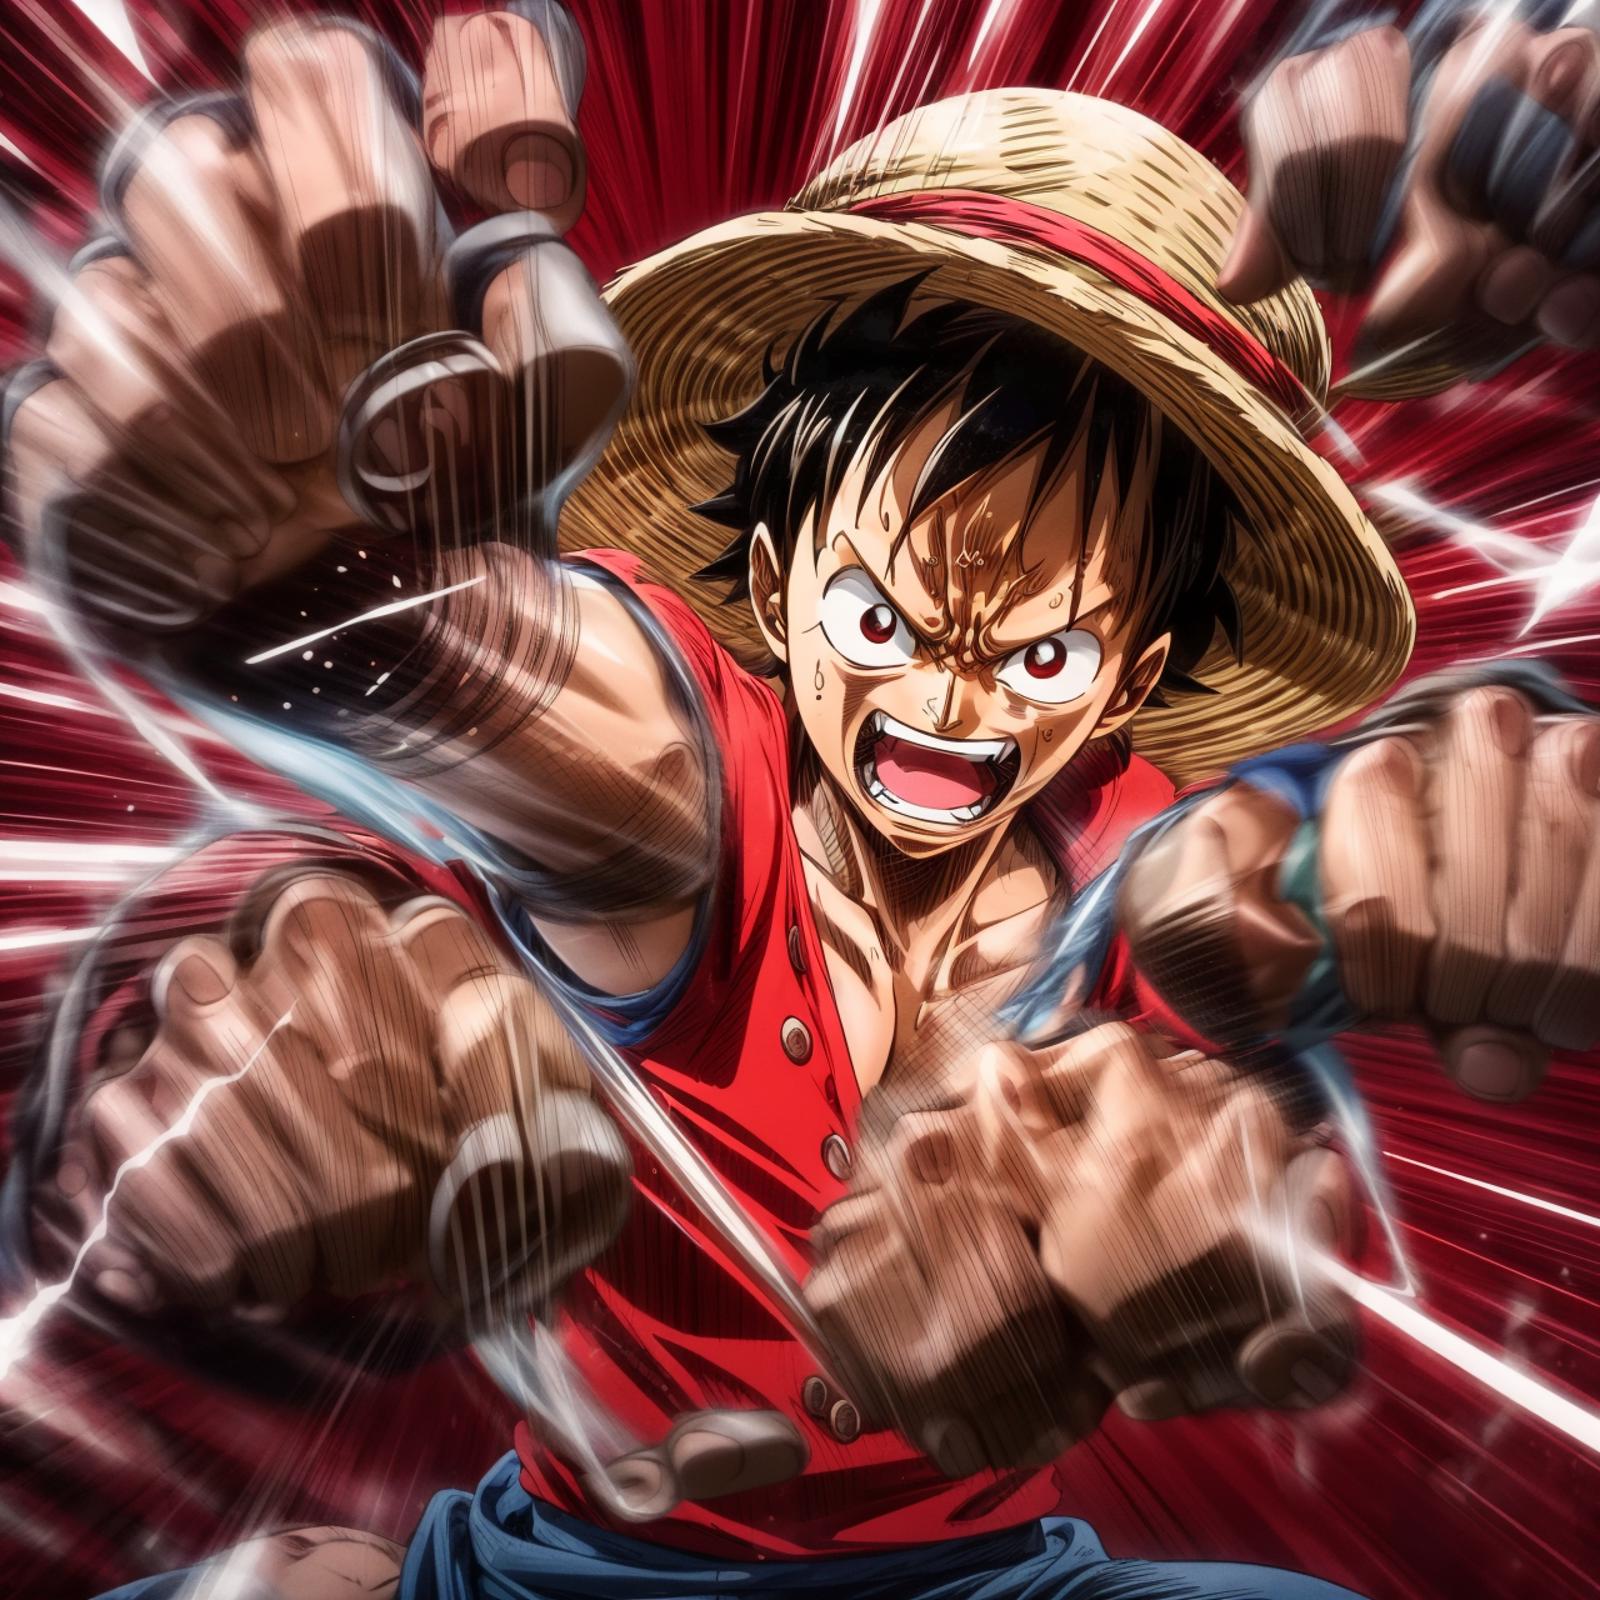 A cartoon of a man with a straw hat and red shirt with a mouth open.